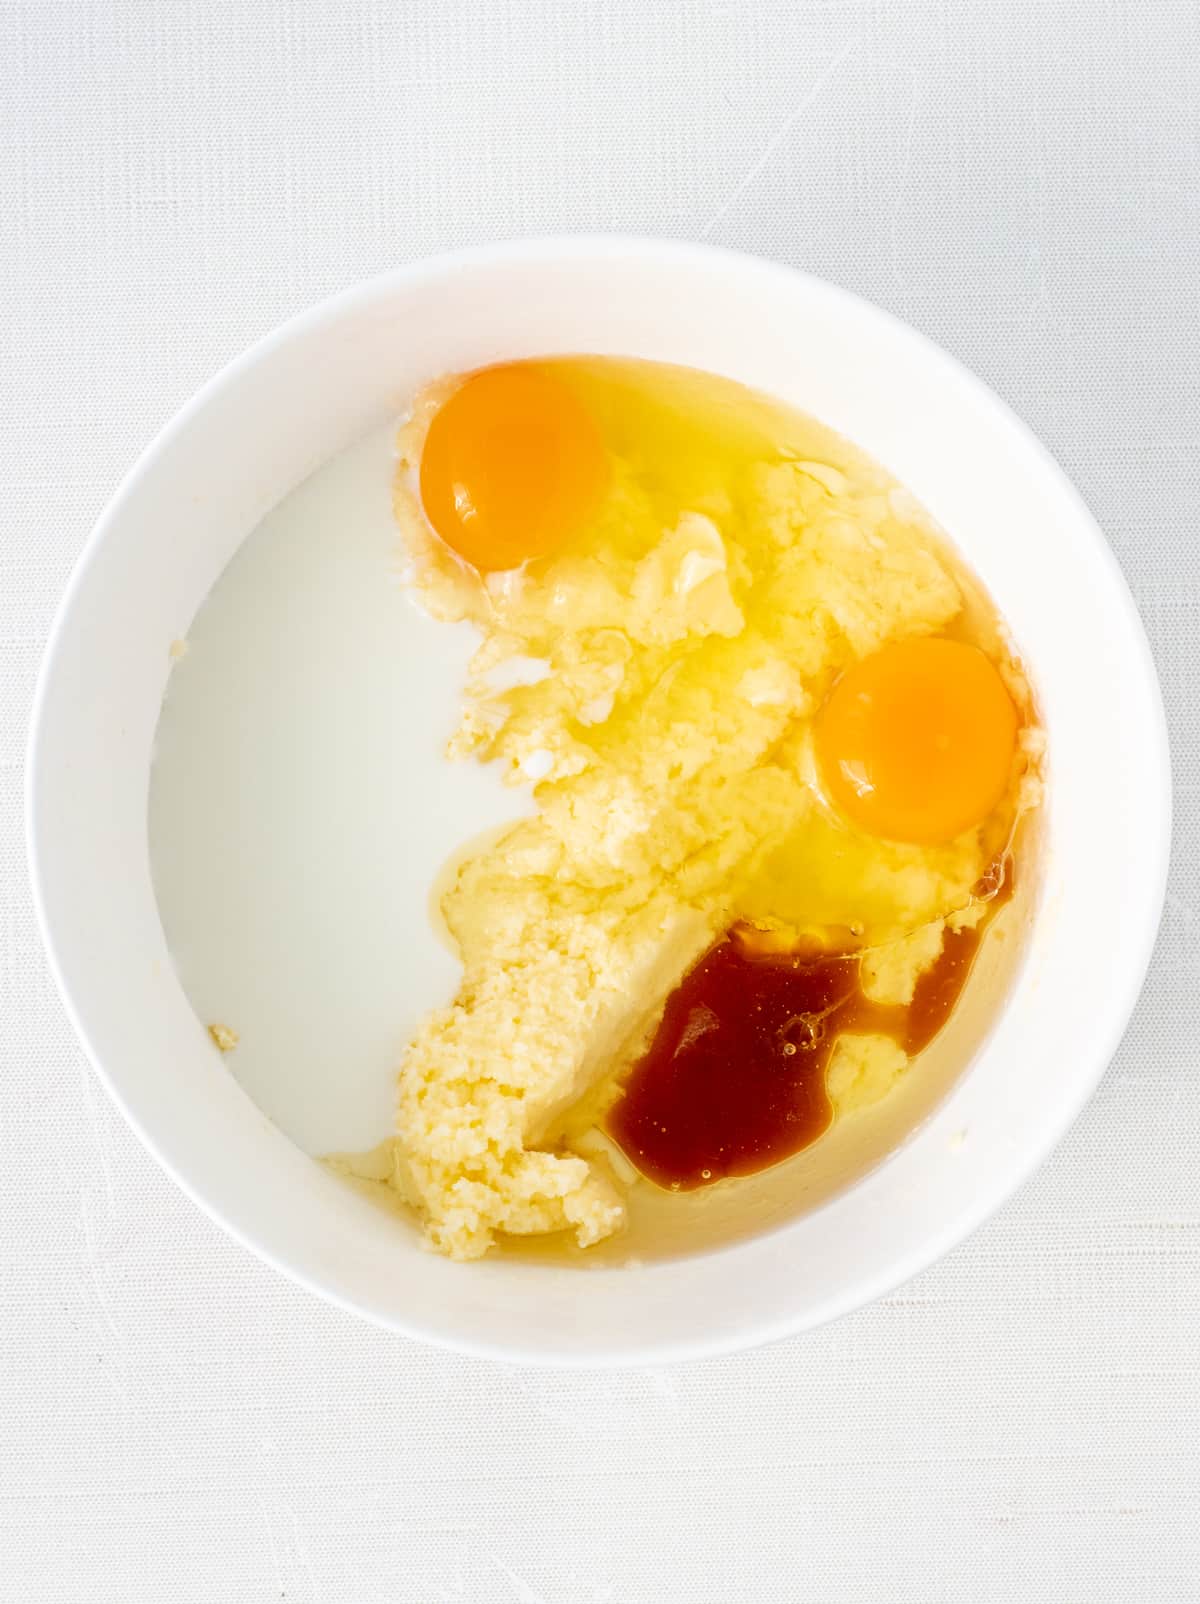 Oil, milk, two eggs, and vanilla extract added to creamed butter and sugar.